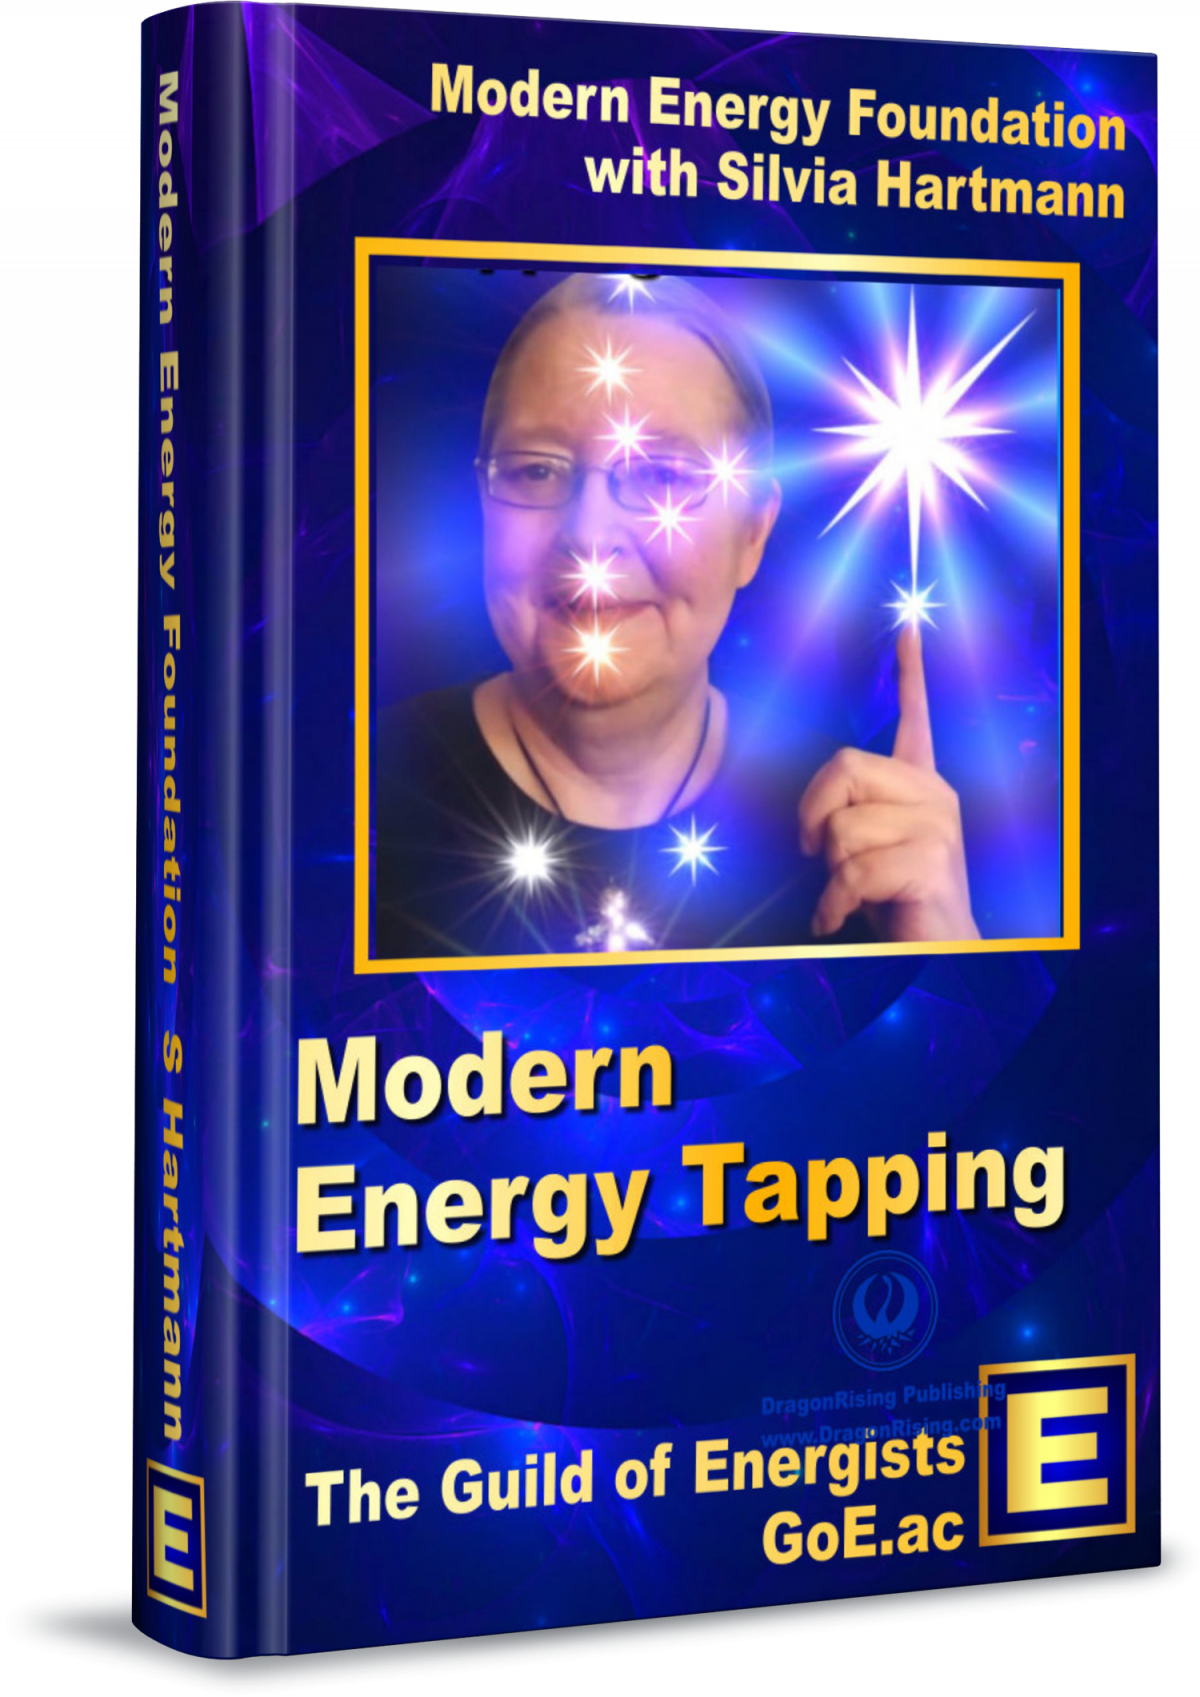 Modern Energy Tapping